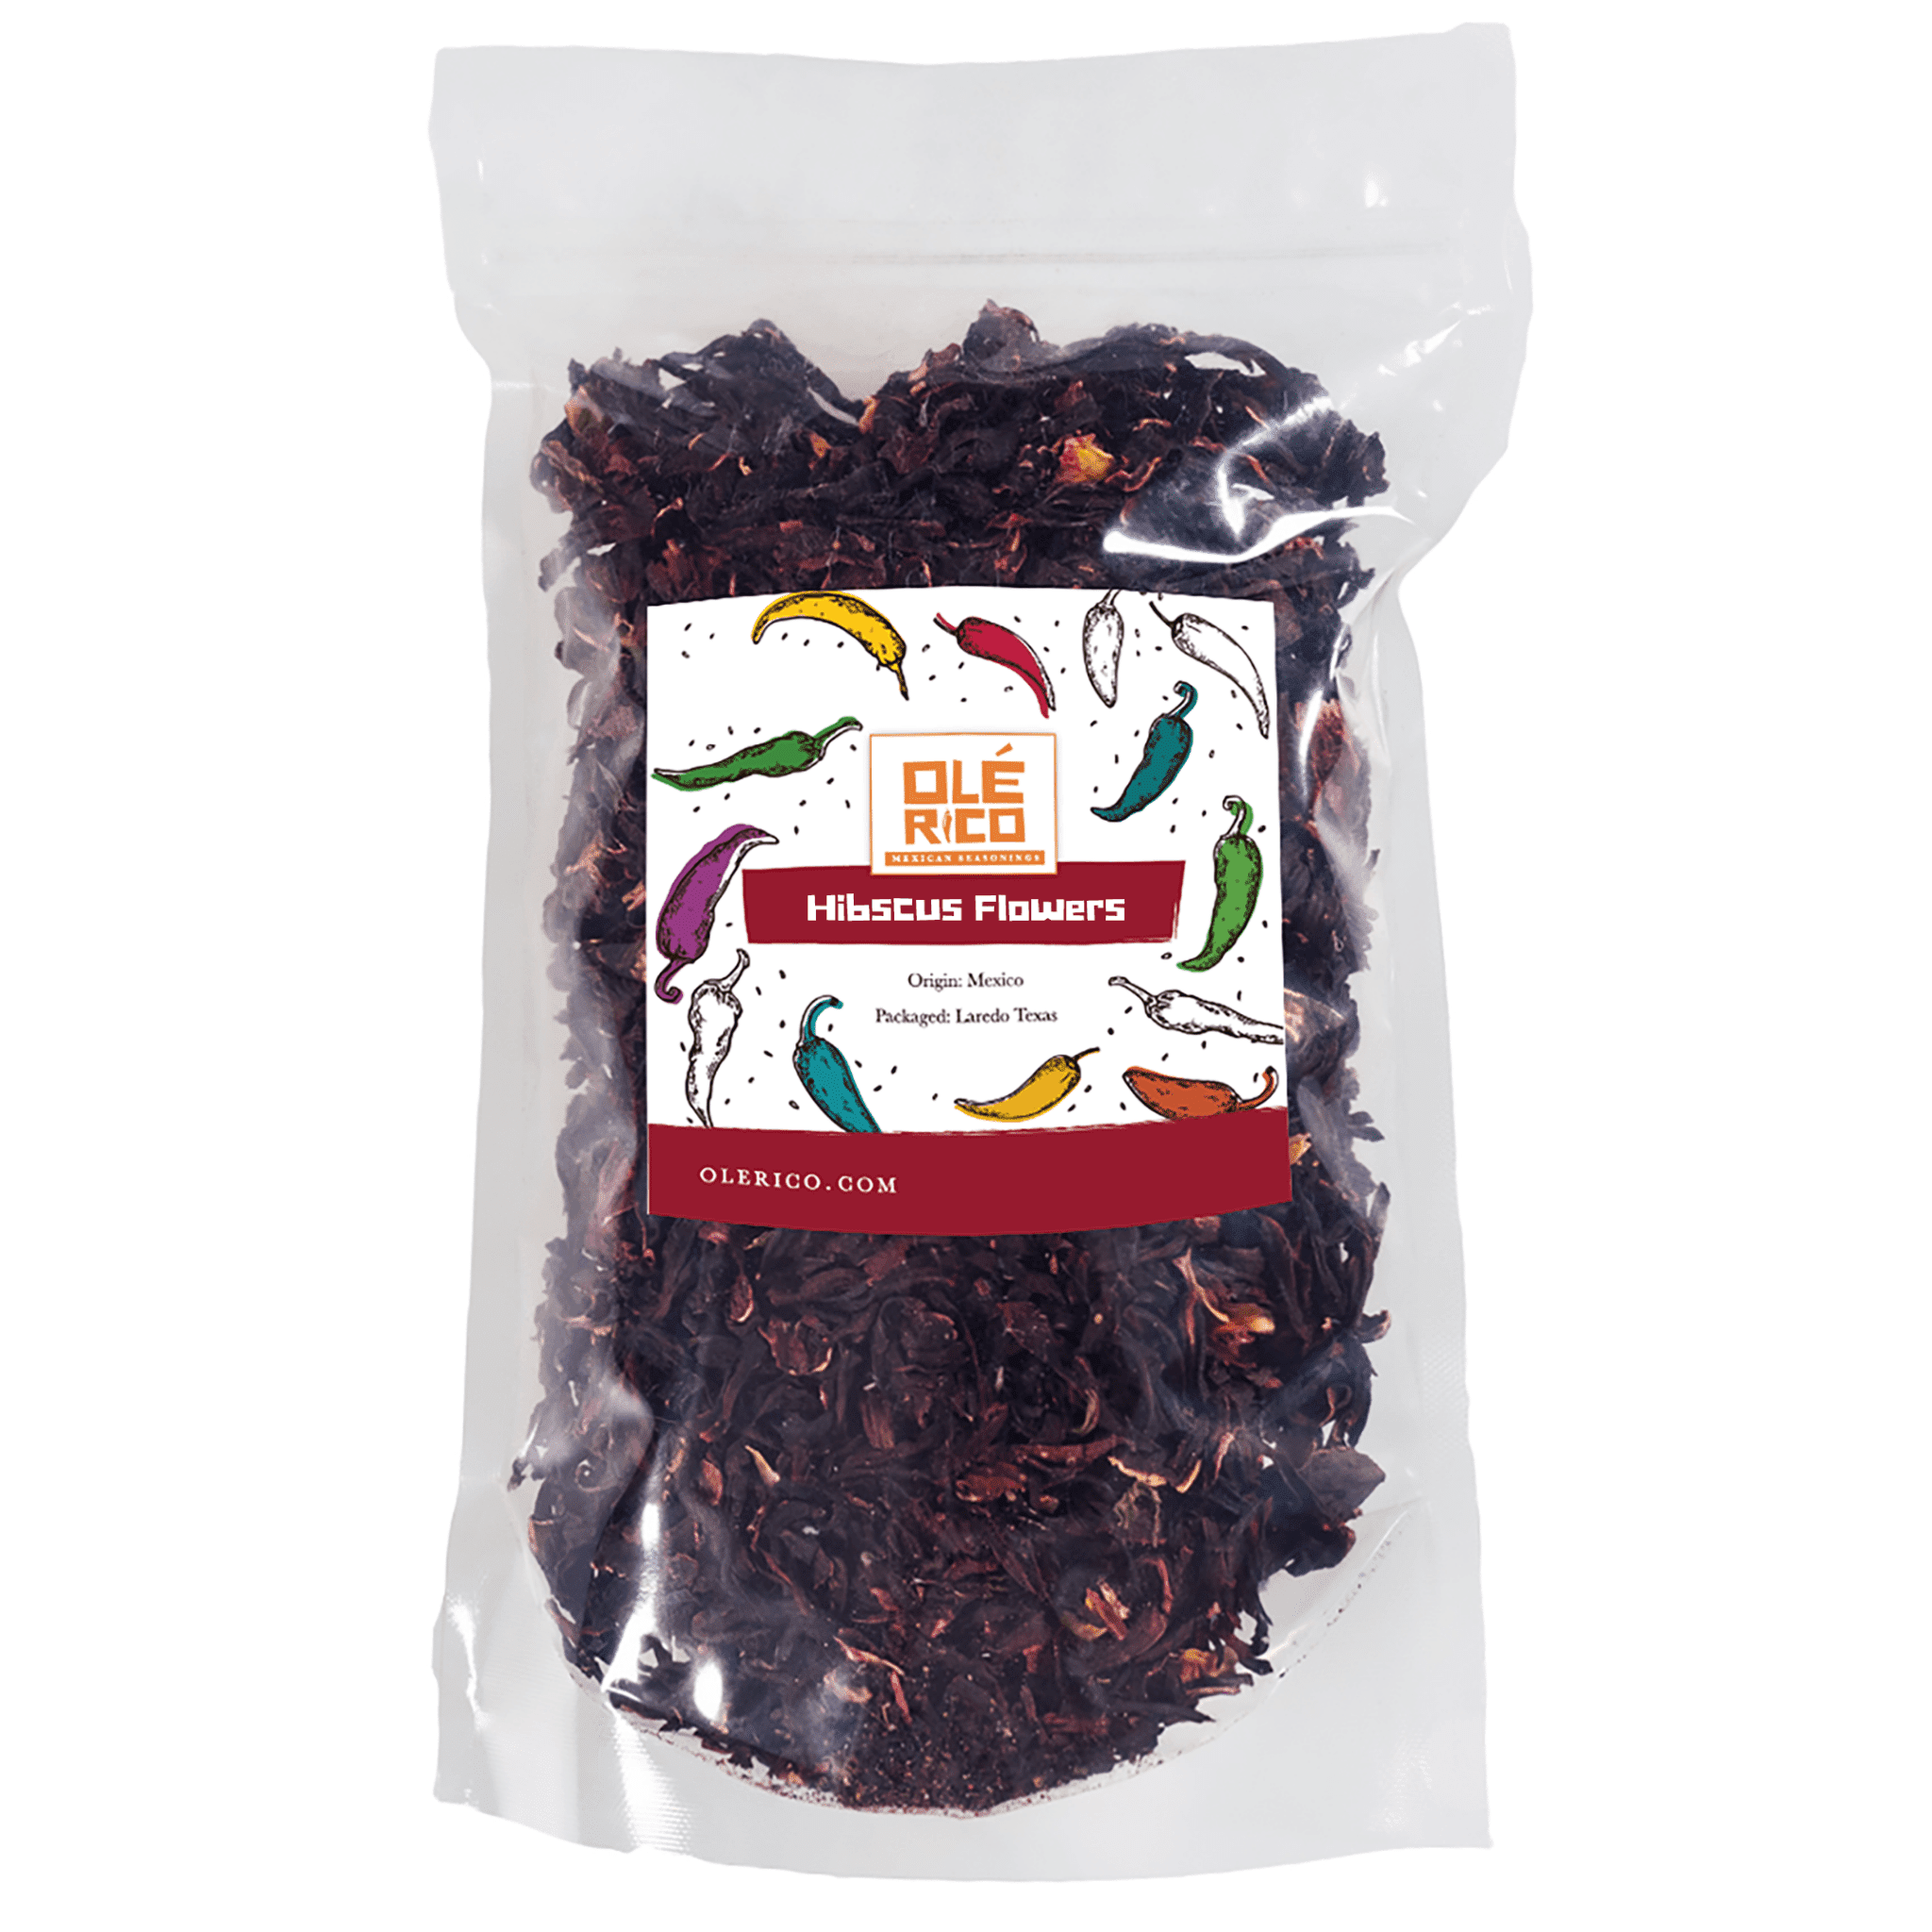 Ole Rico Dried Hibiscus Flowers 8 oz, Great for Hibiscus Tea, Jamaica Tea - 100% Natural Hibiscus Flowers, Cut and Sifted - Packaged in Resealable Bag